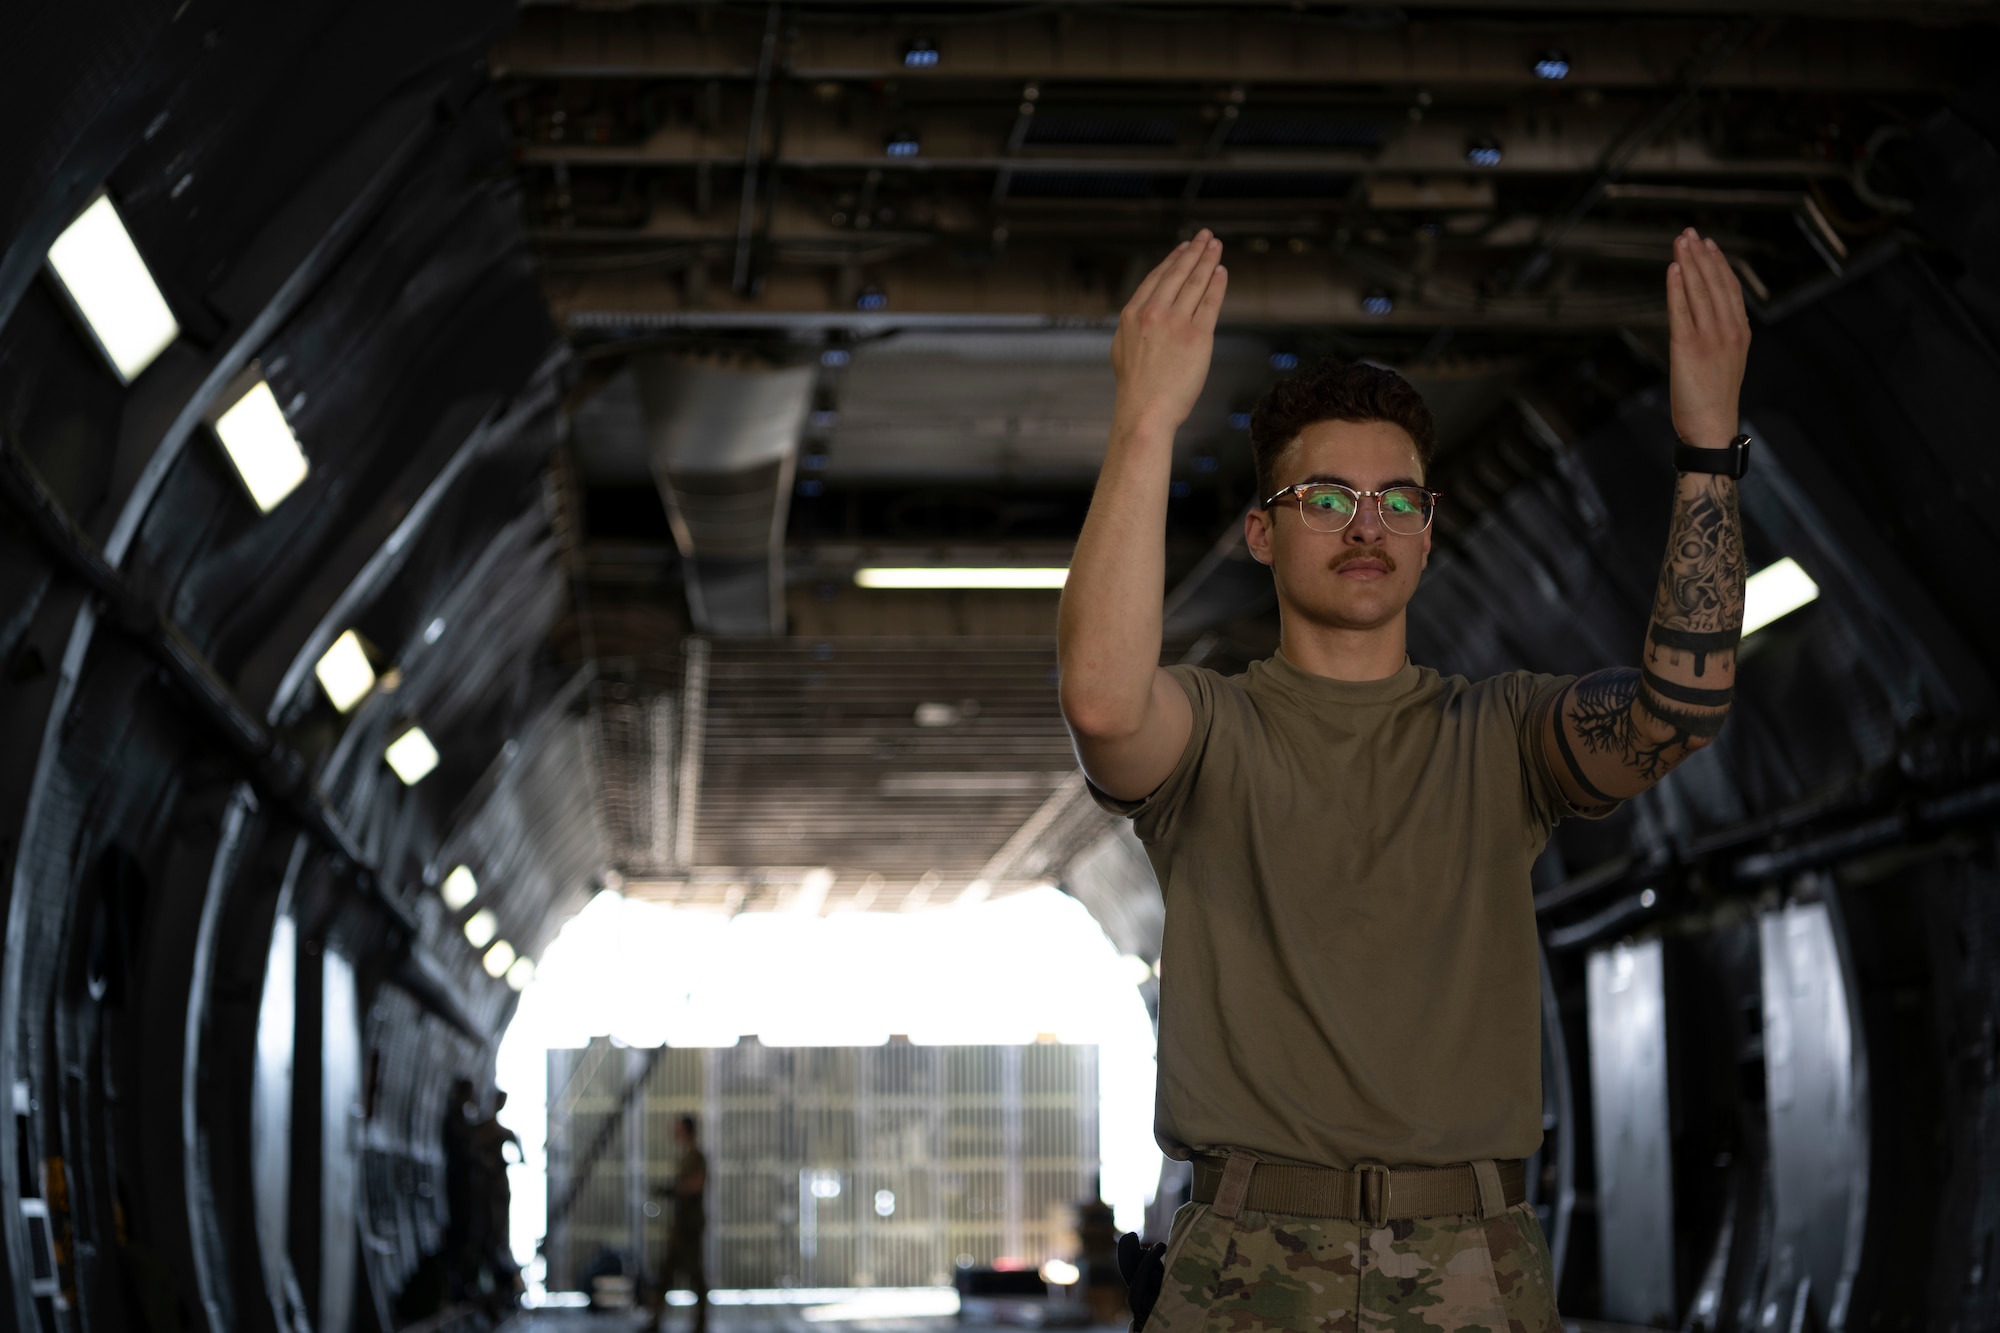 Airman with hands arms up marshalling